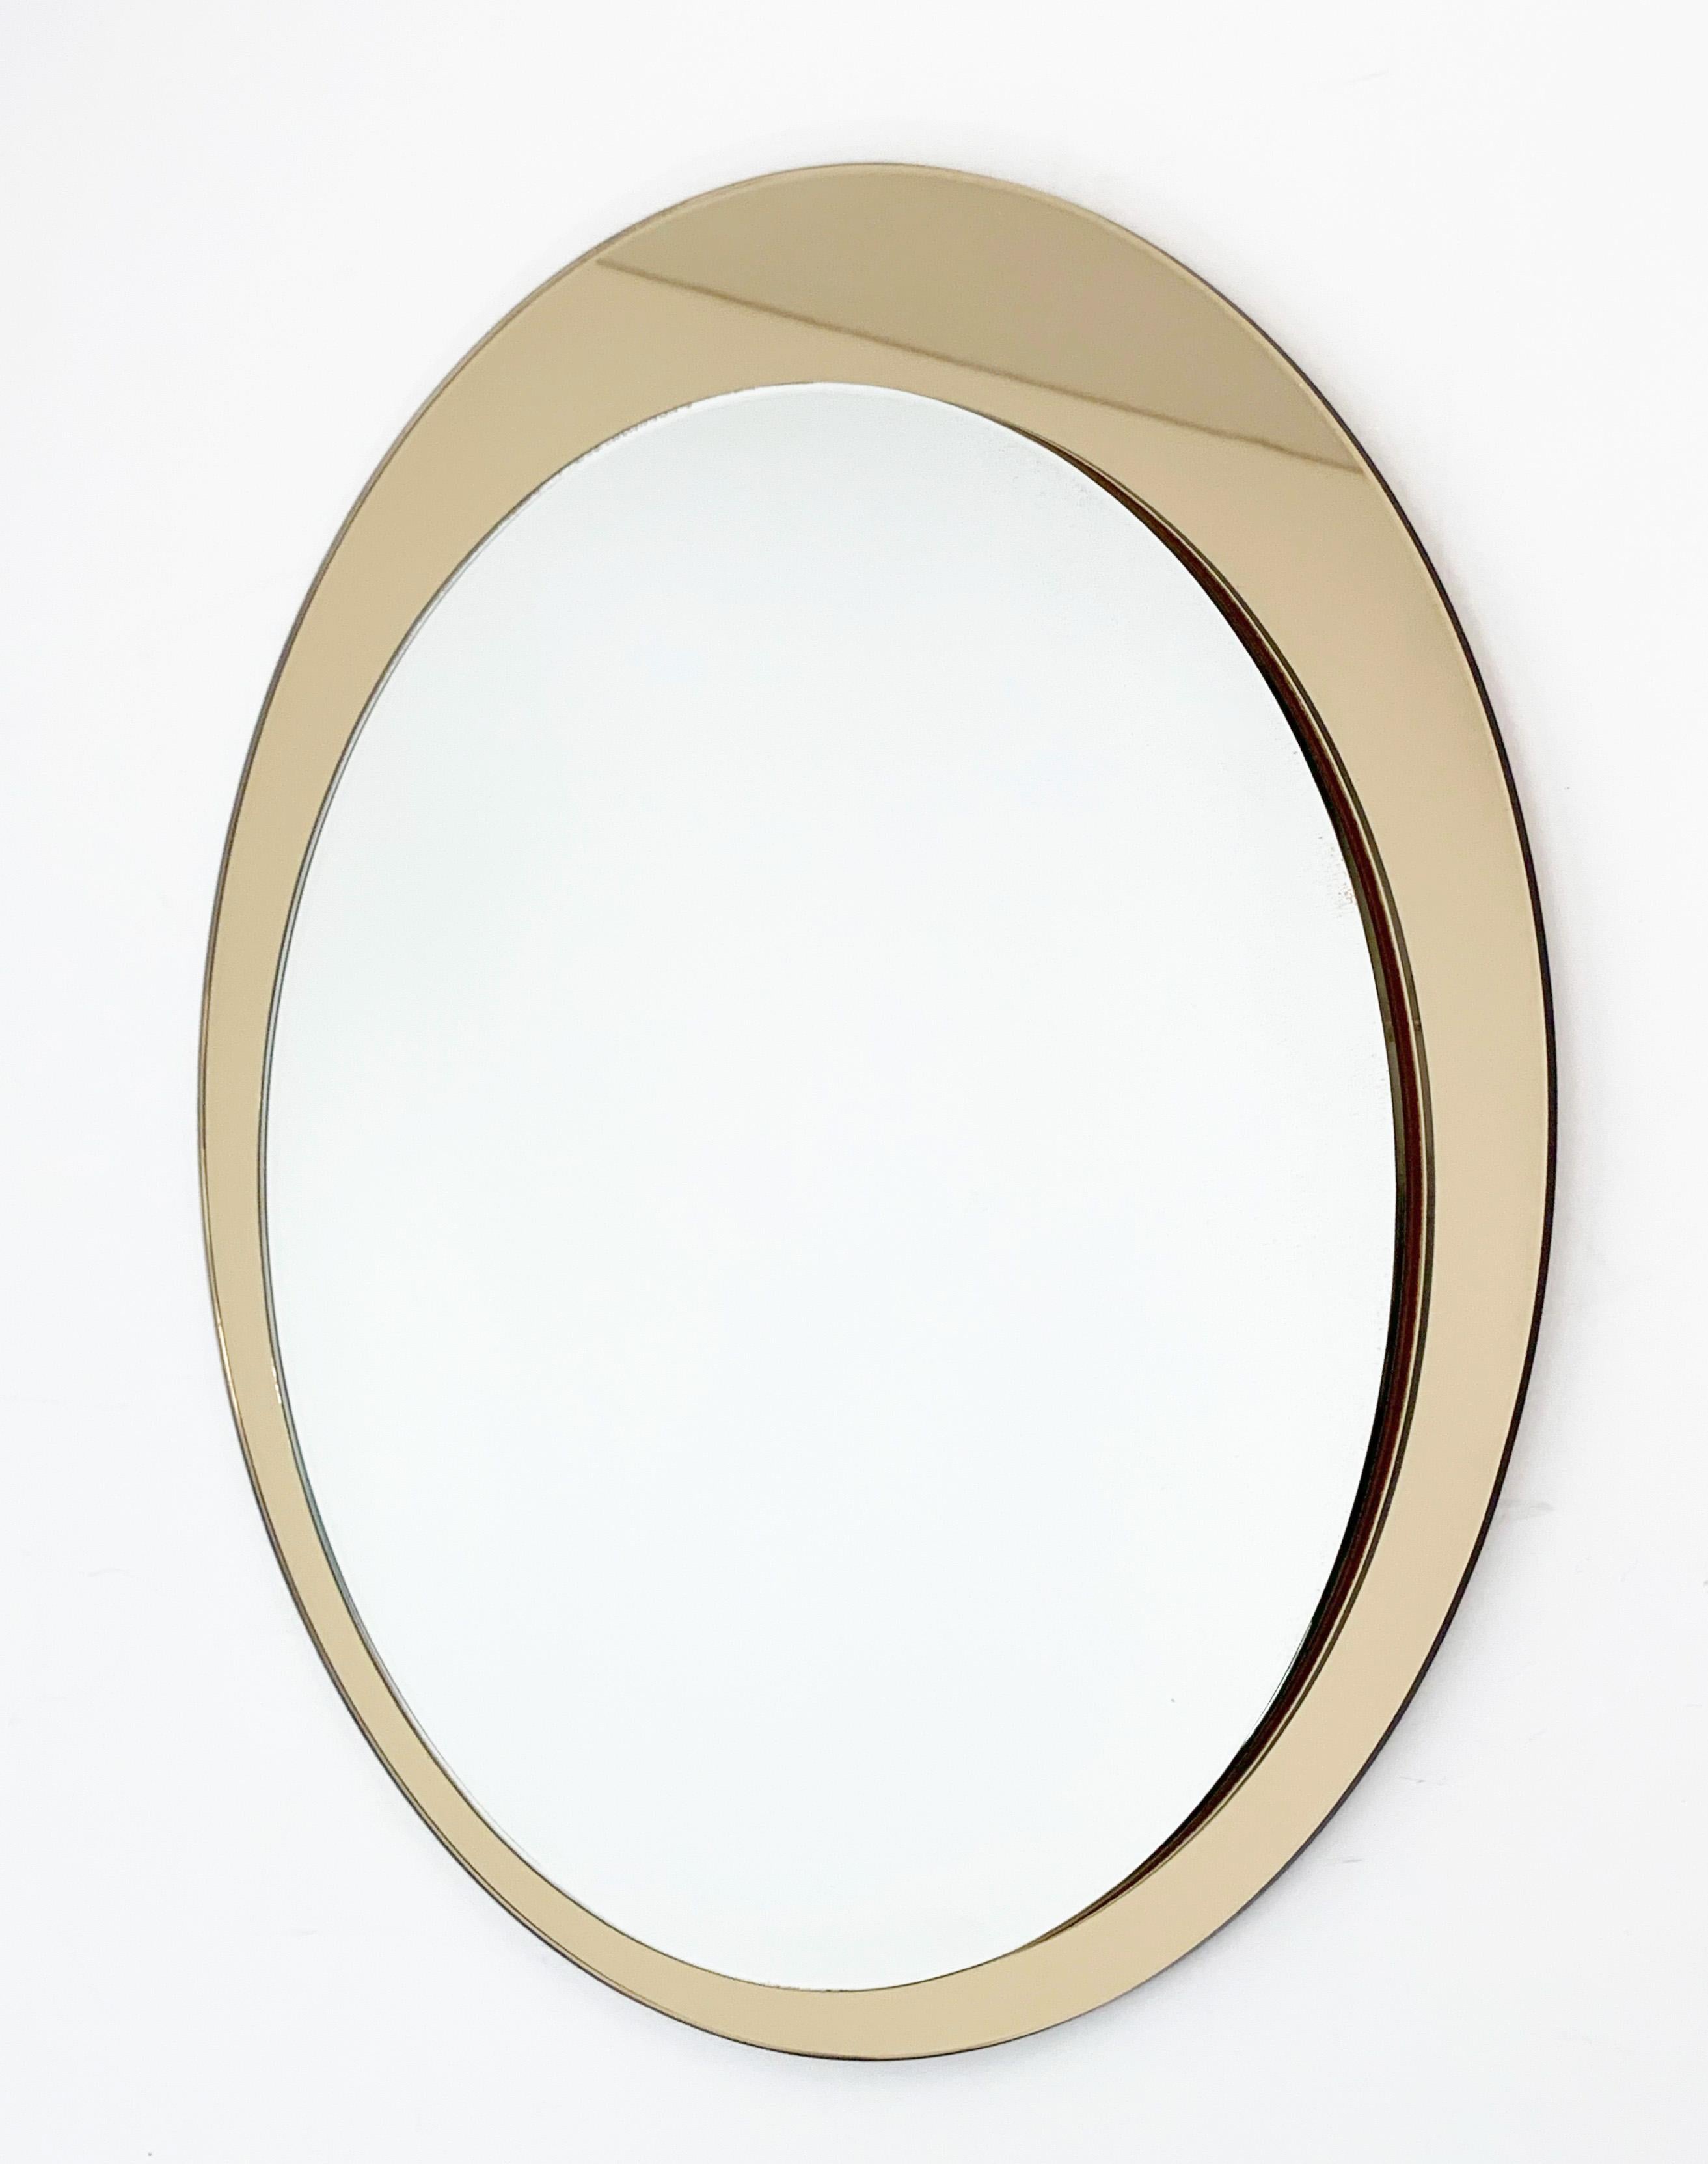 Galimberti Midcentury Italian Round Mirror with Double Brassed Gold Frame, 1975 For Sale 5